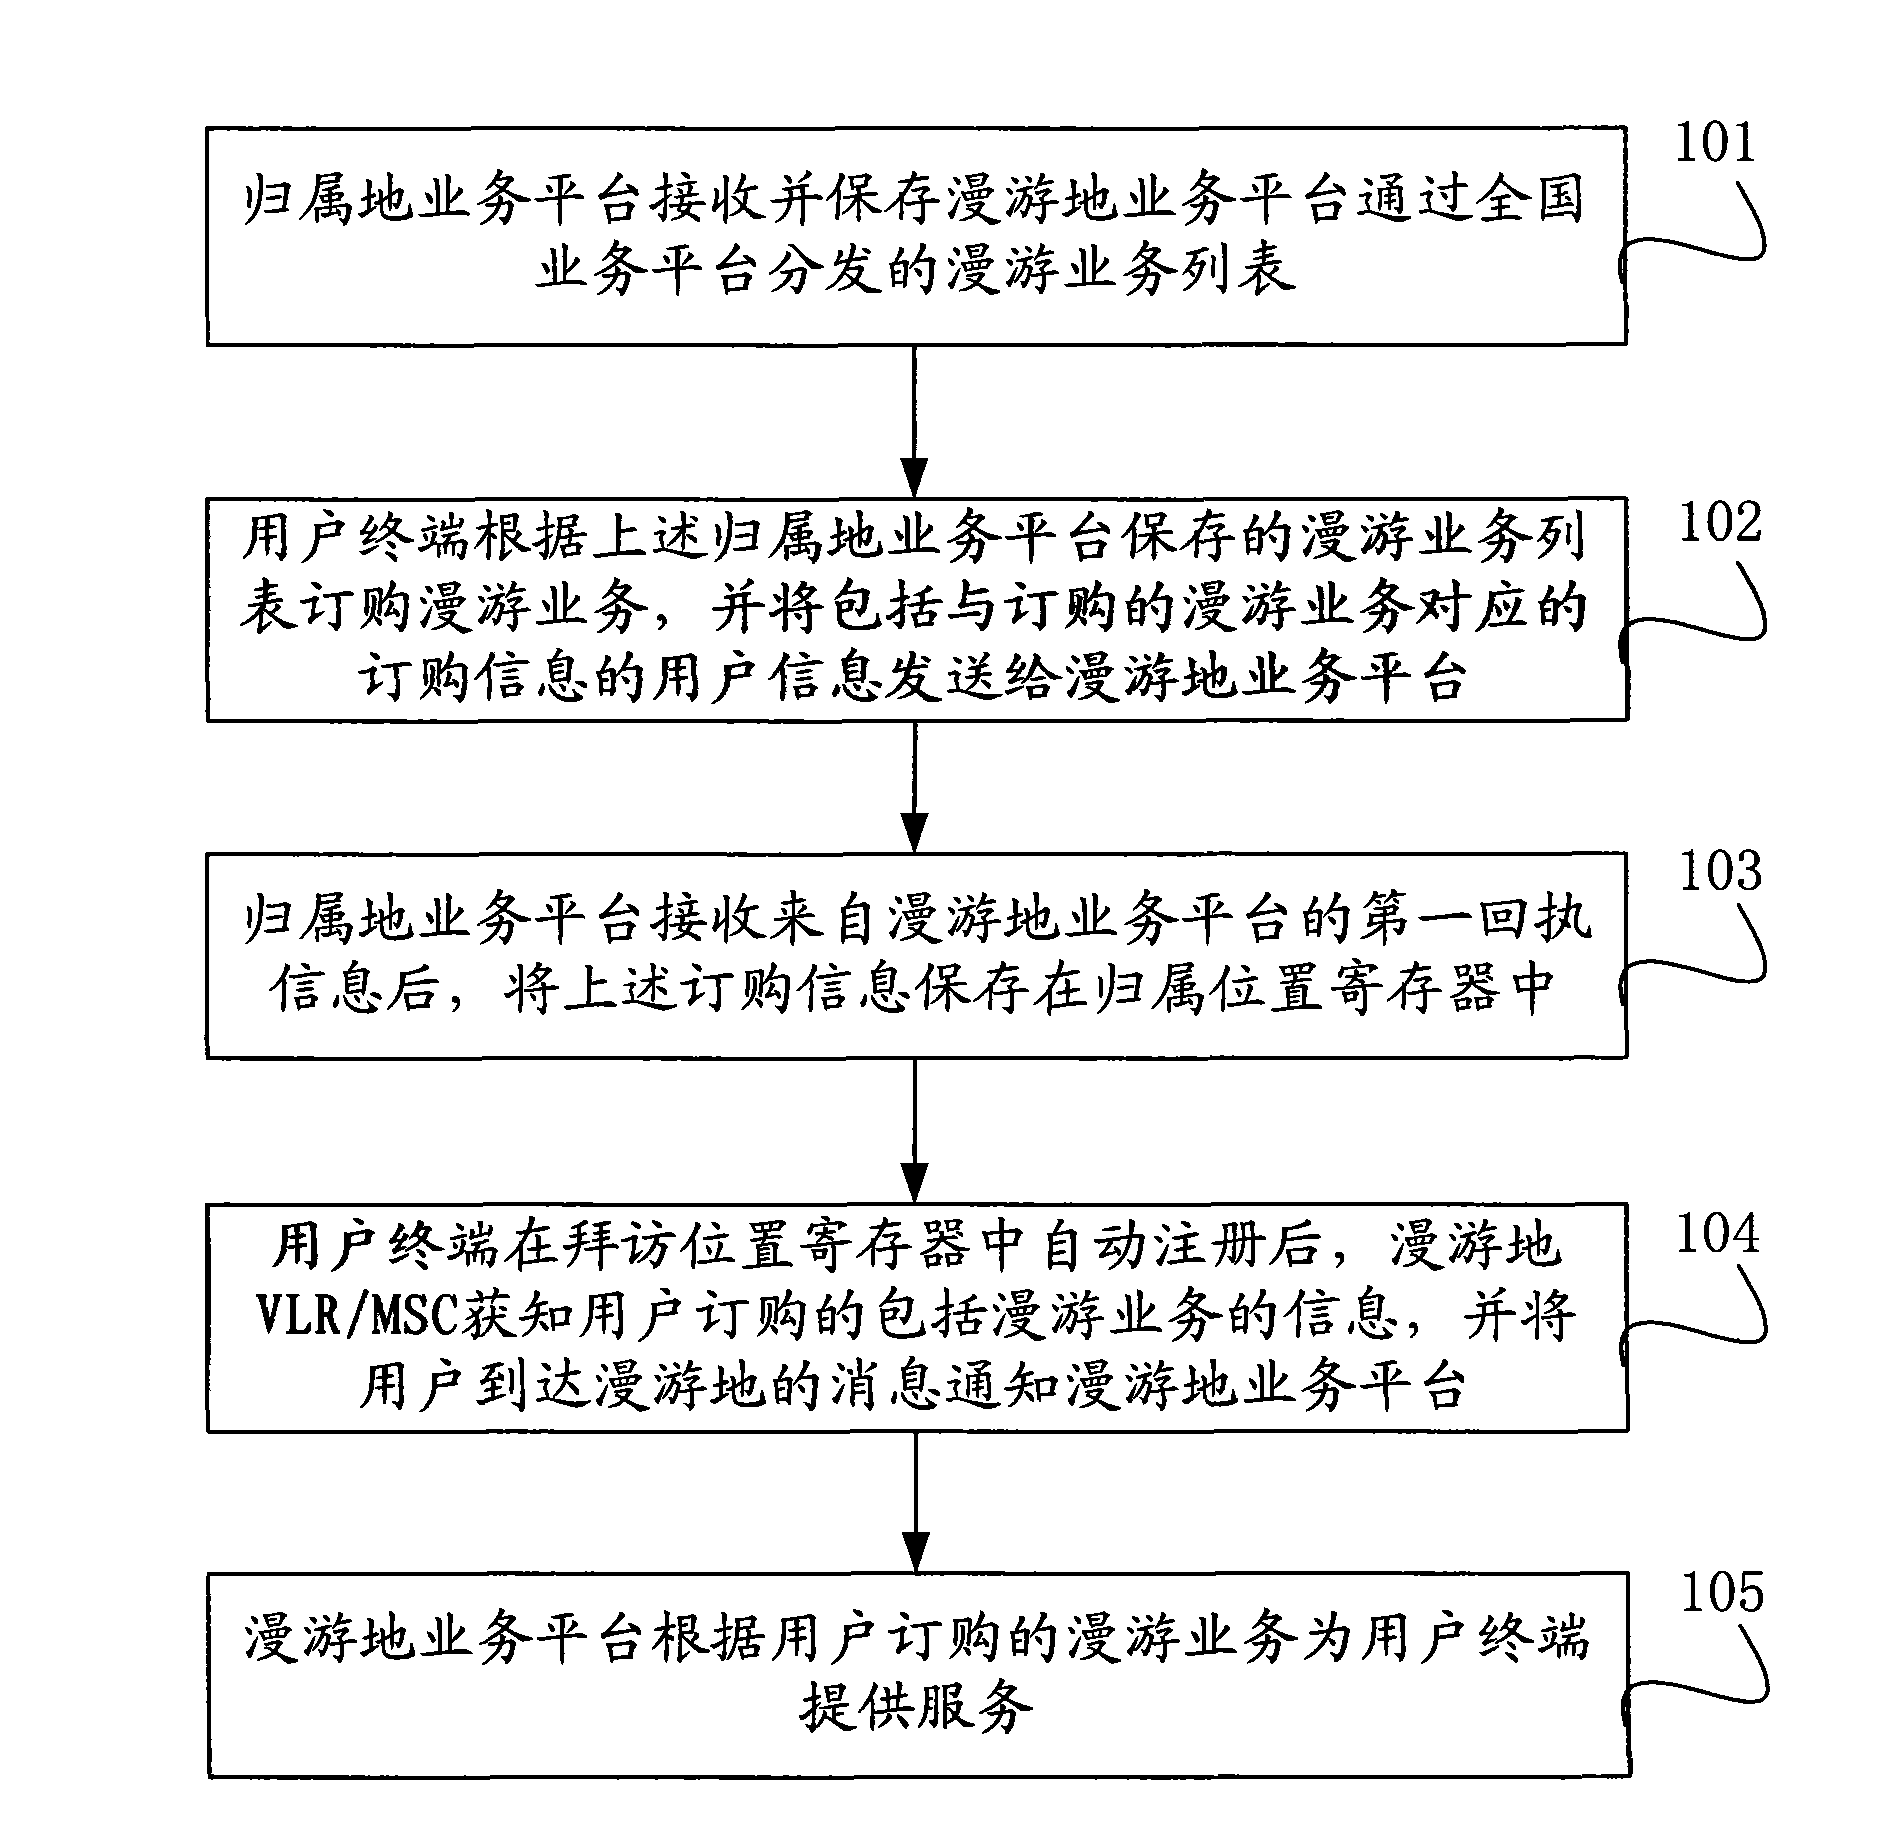 Method and system for processing roaming service